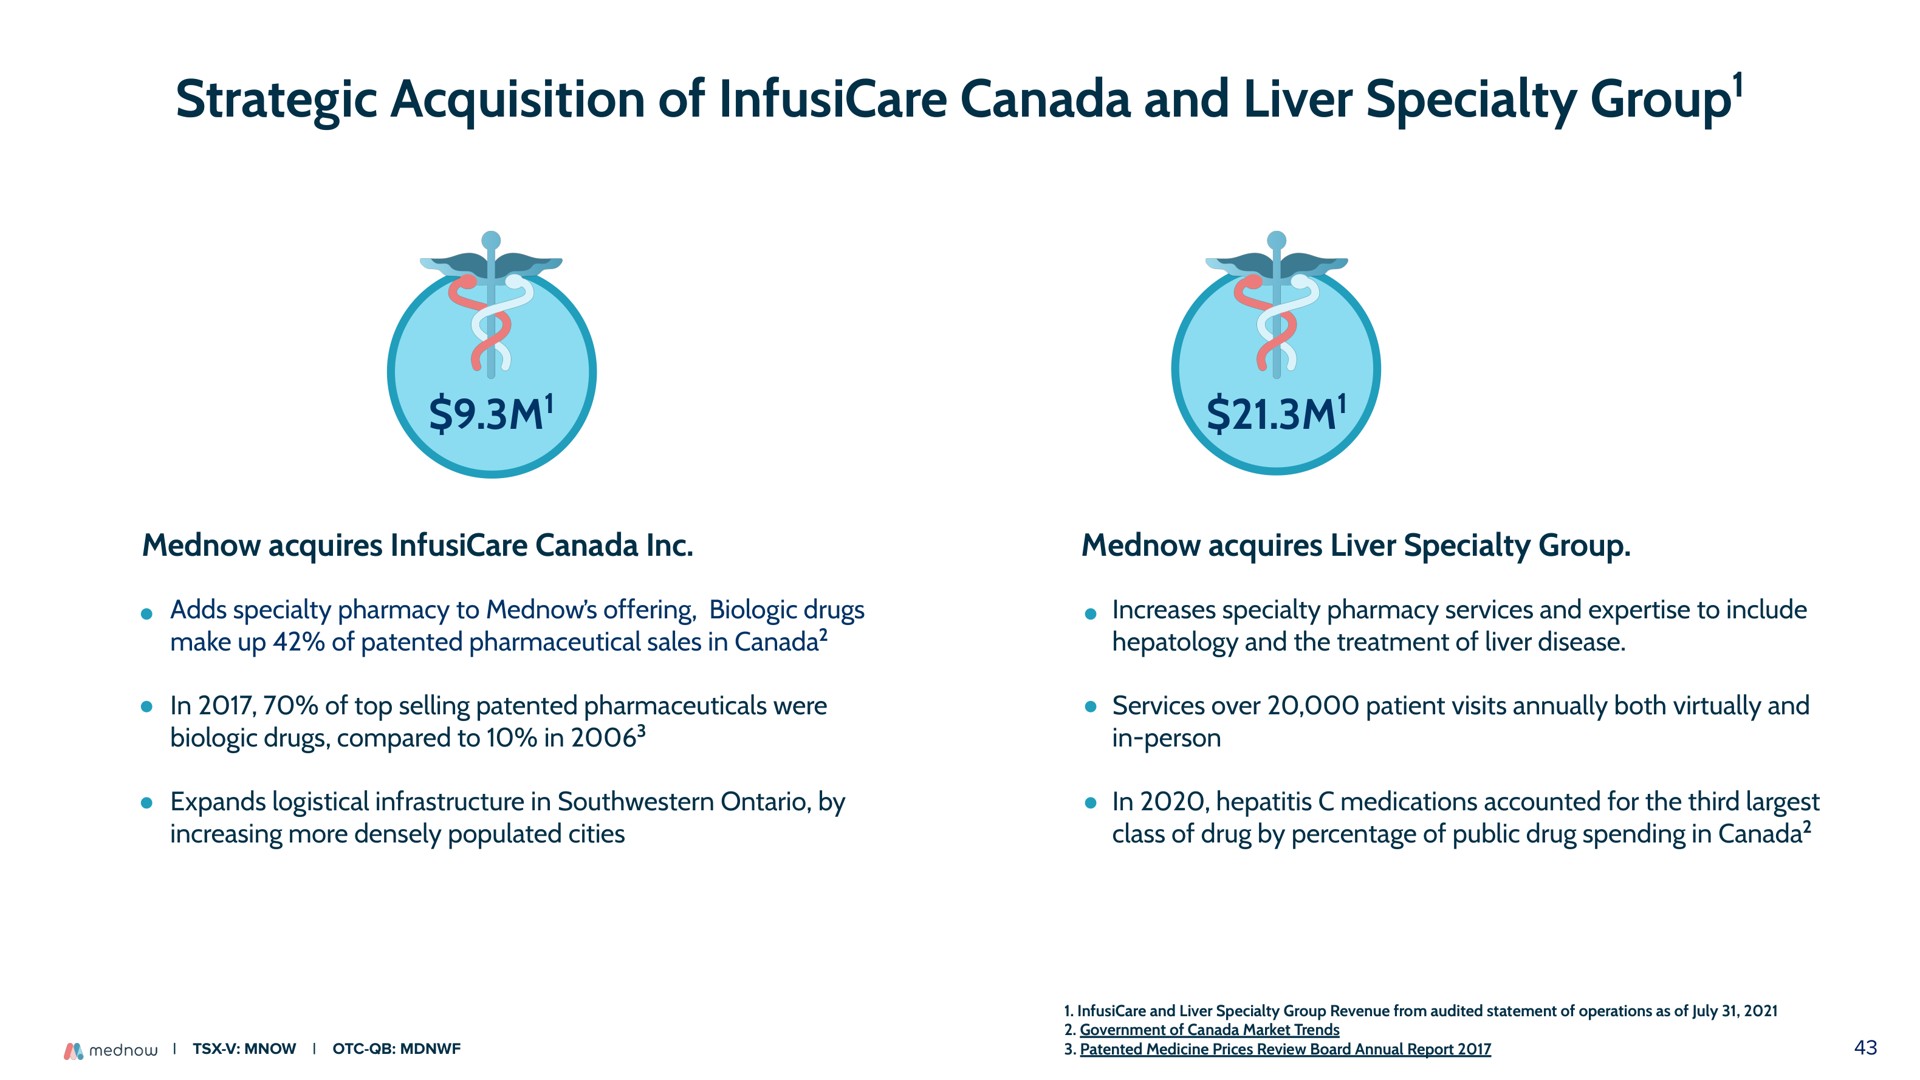 strategic acquisition of canada and liver specialty group group | Mednow